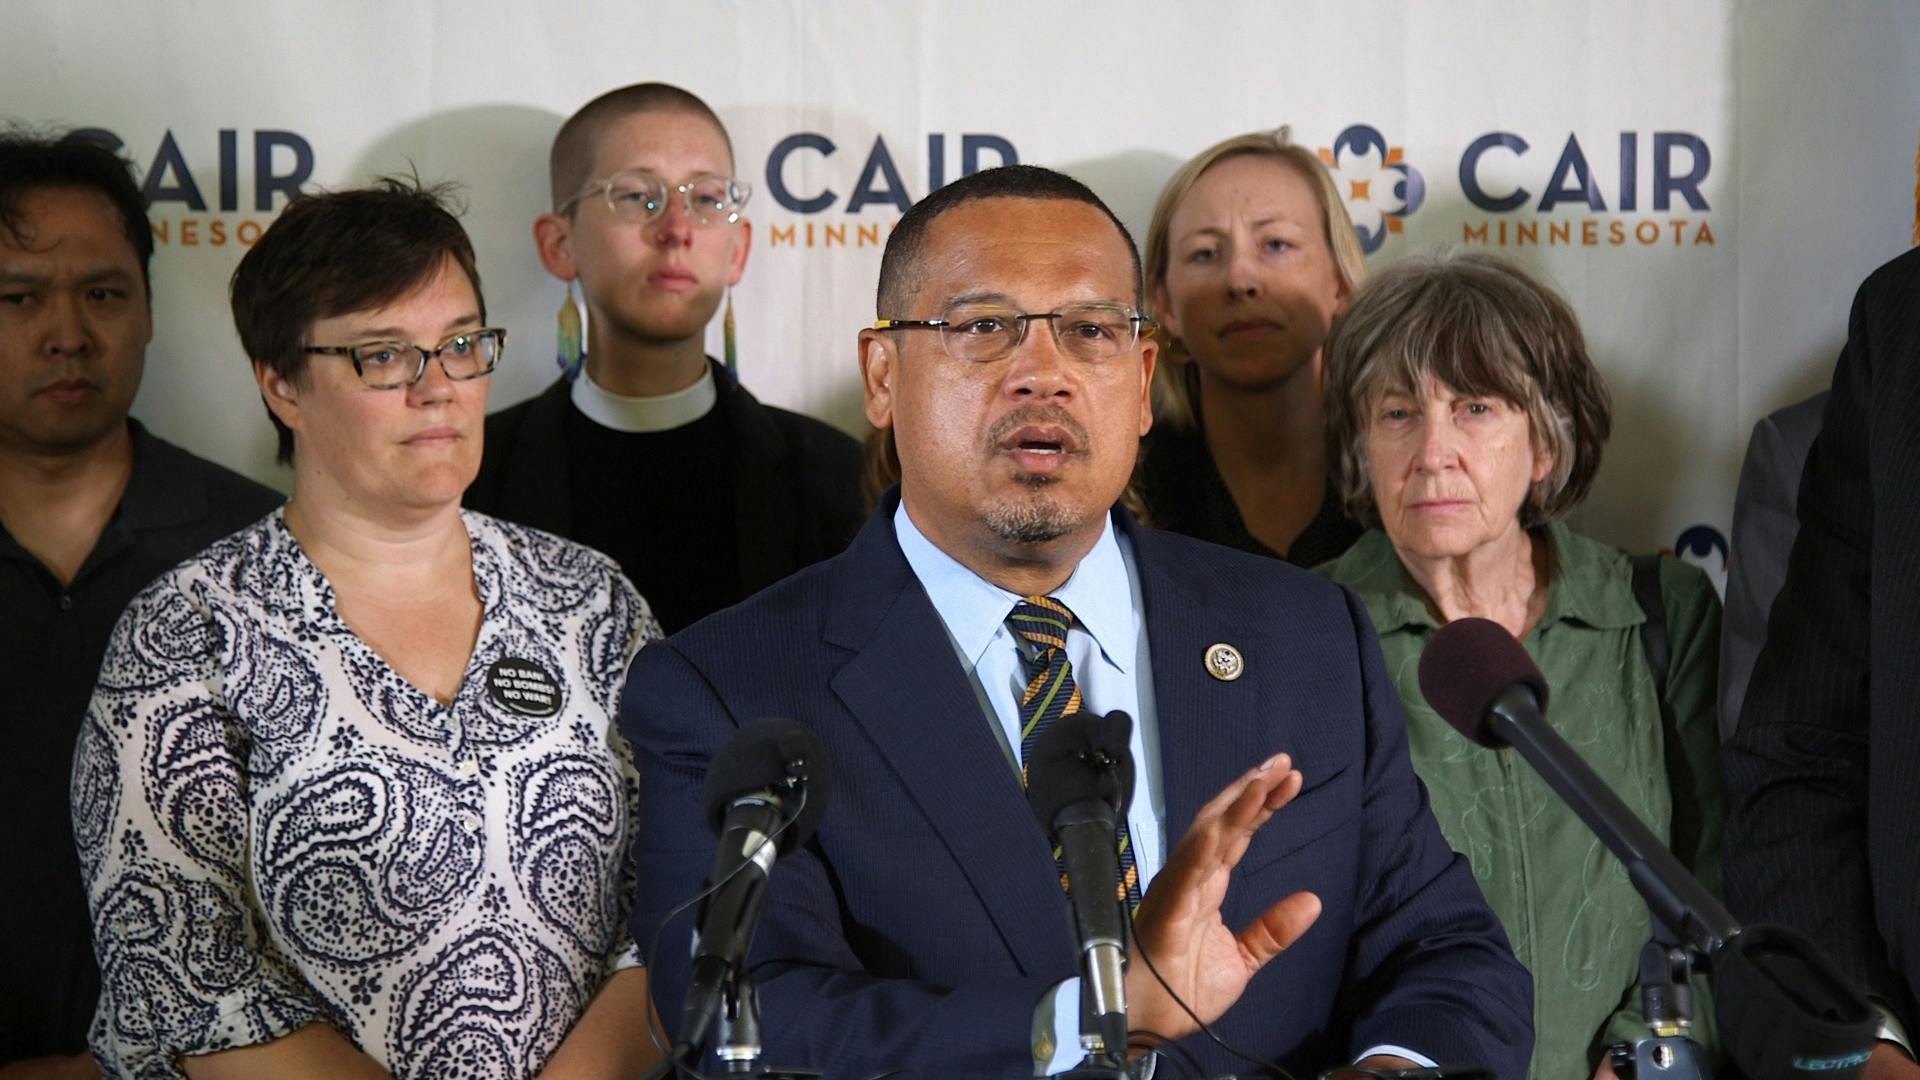 Ellison and other Minnesota Muslim community members and supporters held a news conference Tuesday to rebuke the Supreme Court's decision to uphold President Donald Trump's ban on travel from several mostly Muslim countries.